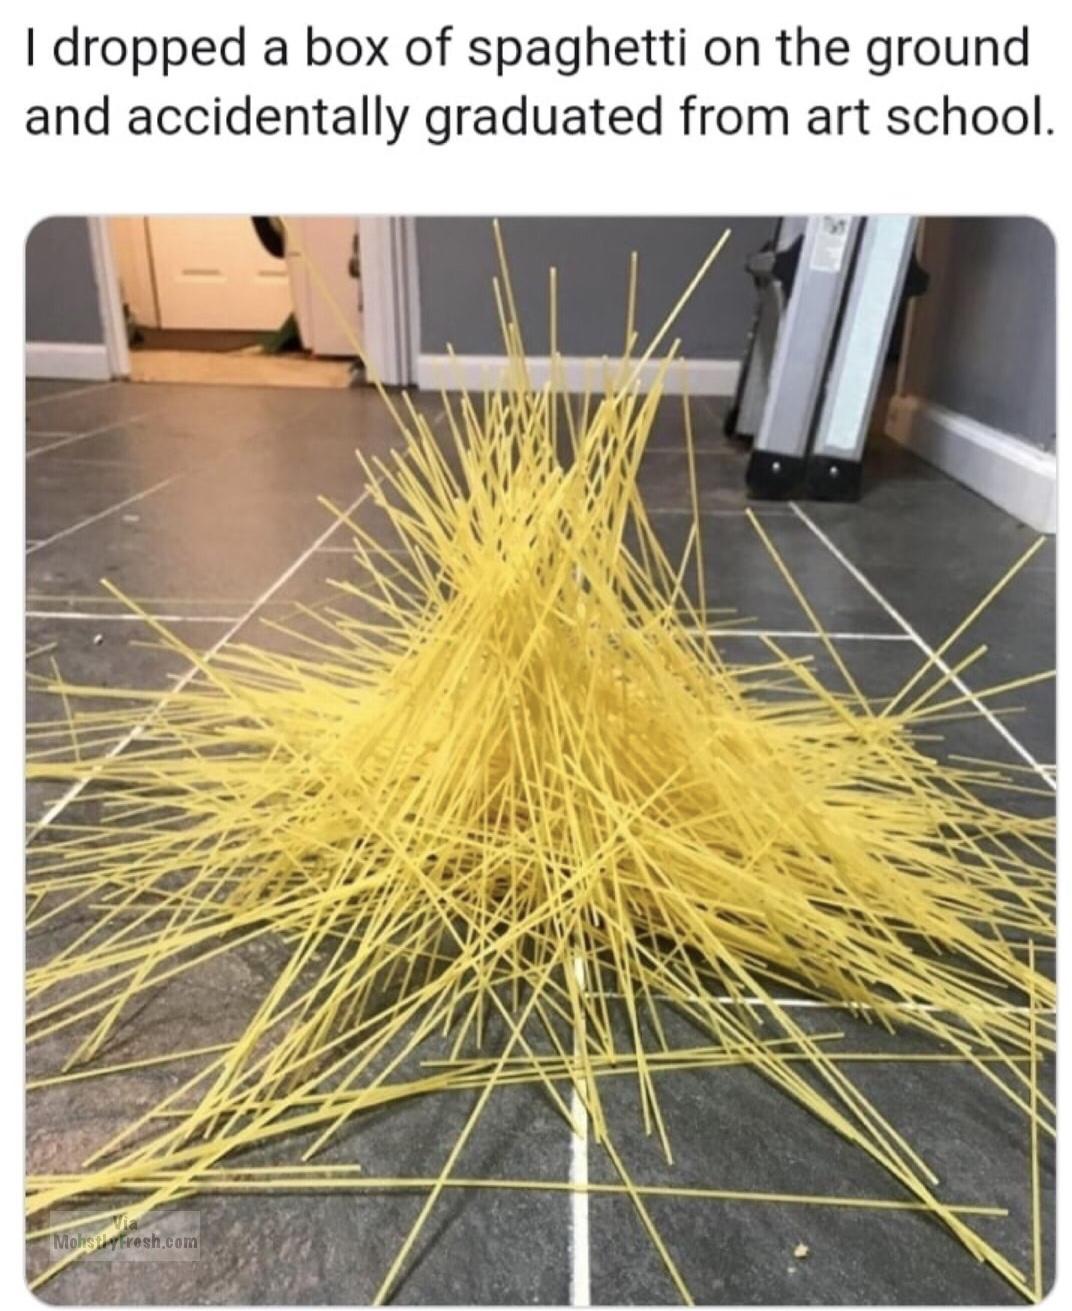 dropped a box of spaghetti - I dropped a box of spaghetti on the ground and accidentally graduated from art school. Mohsil Fresh.com